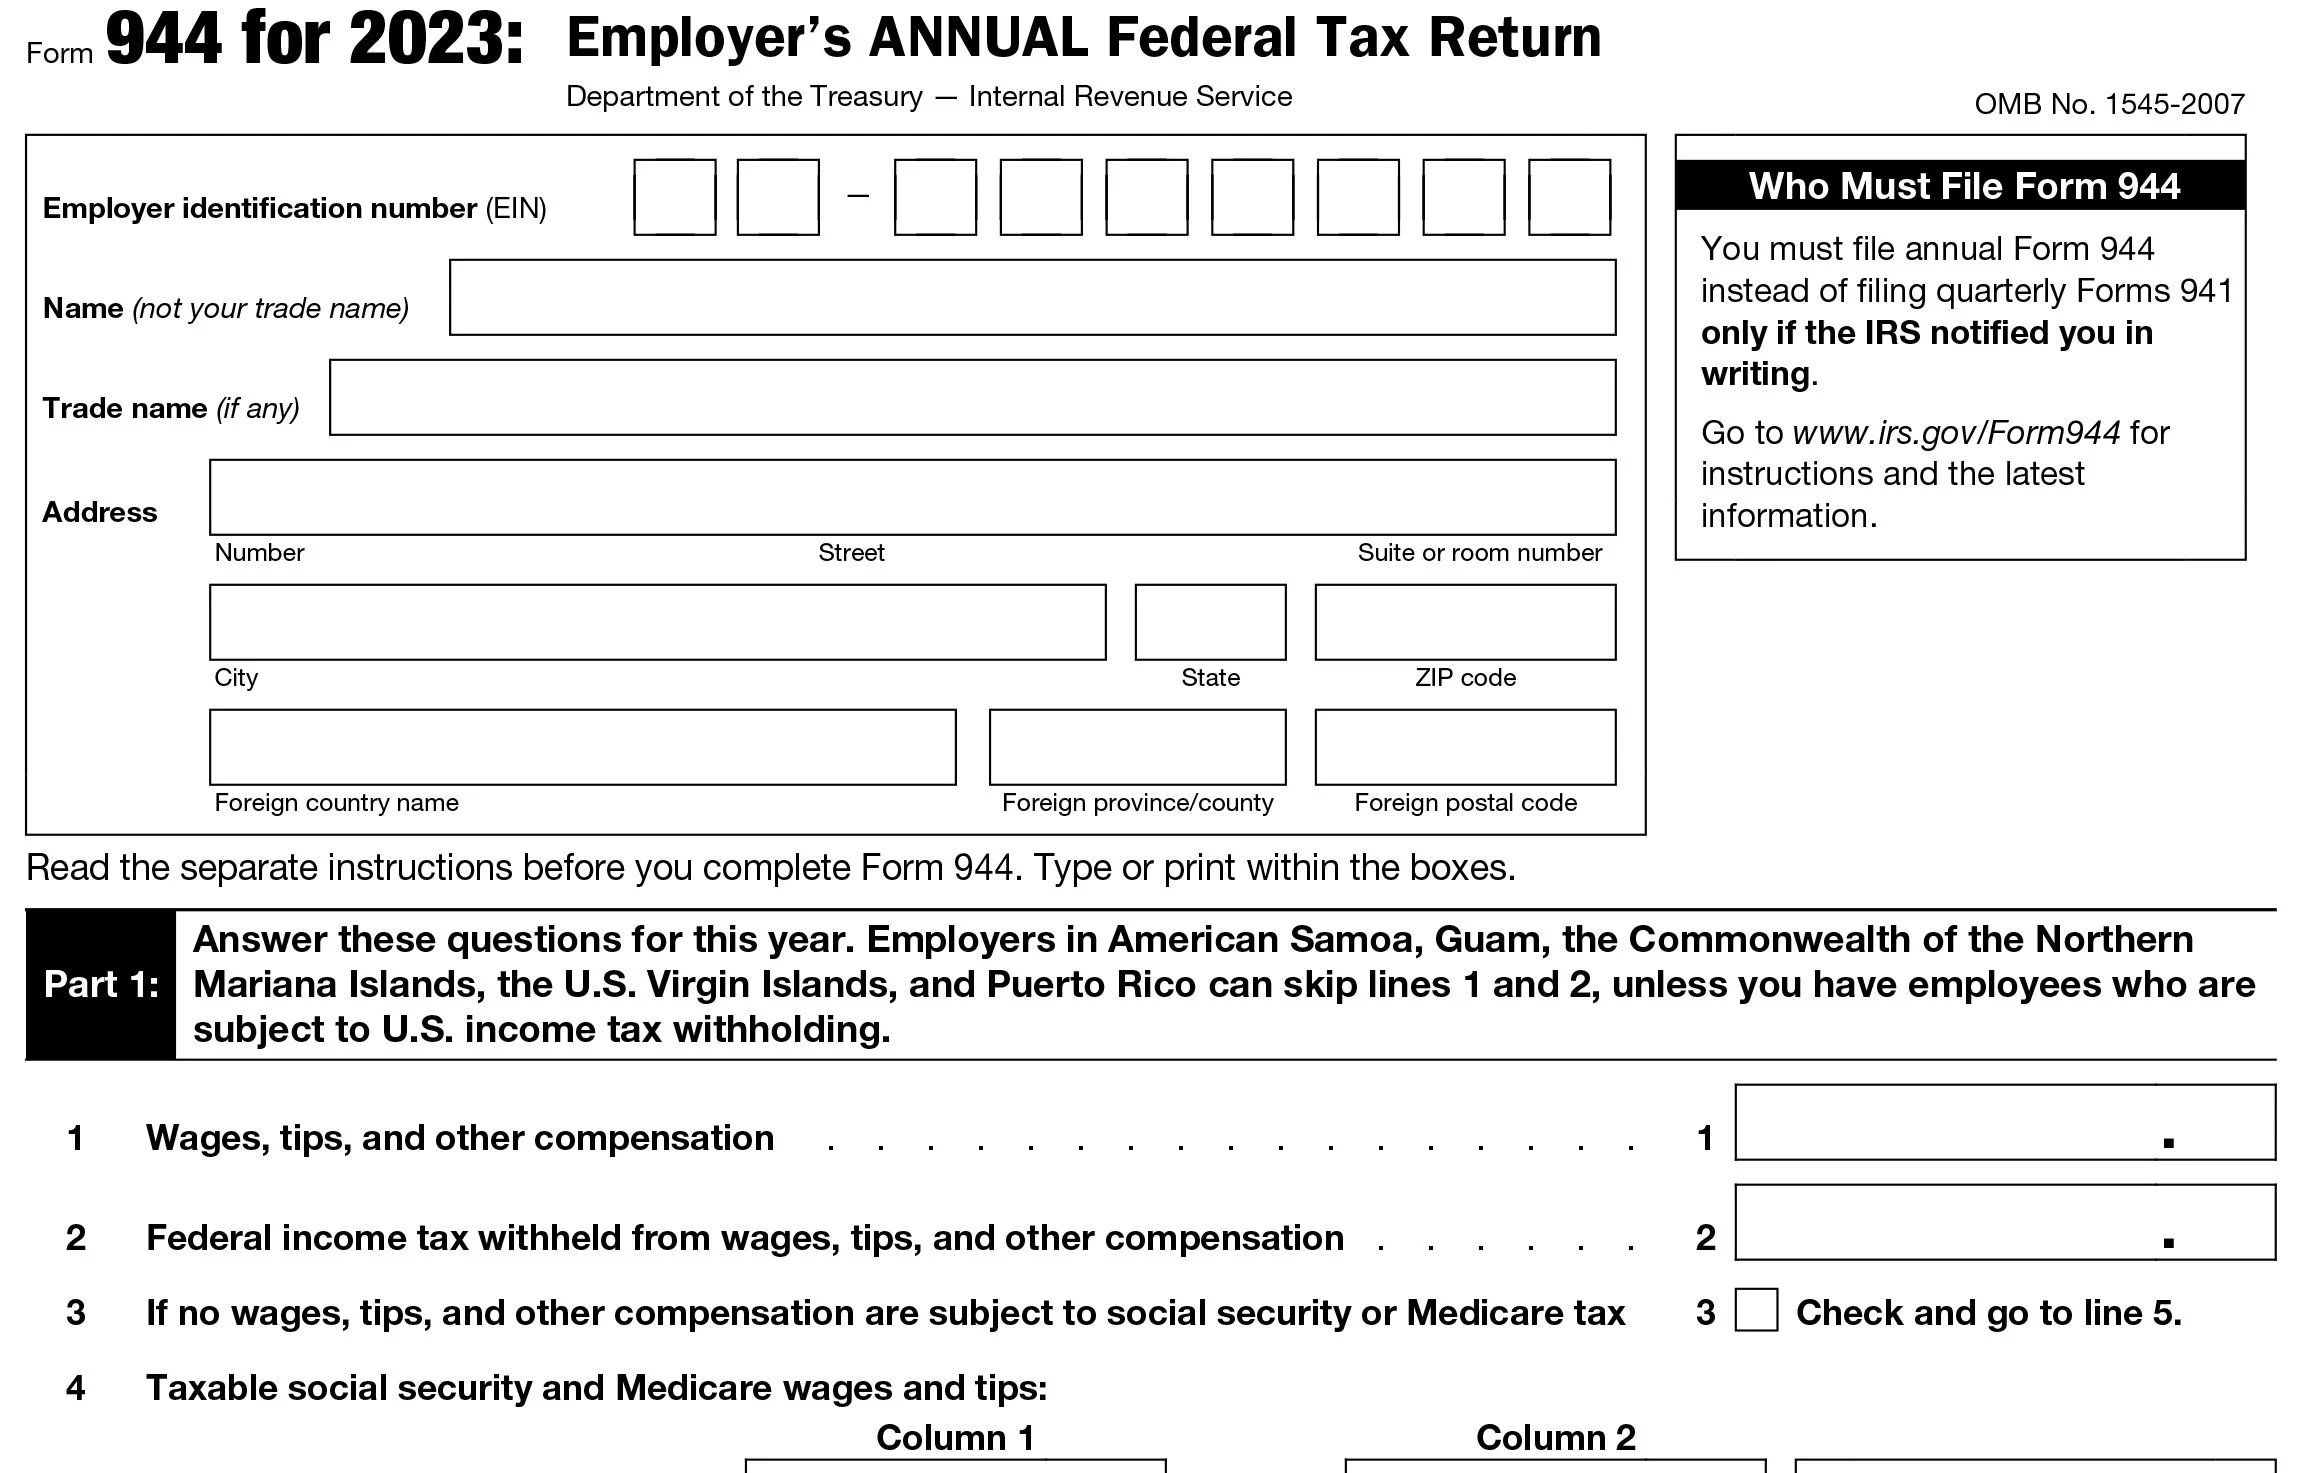 Form 944 Due Date & Mailing address